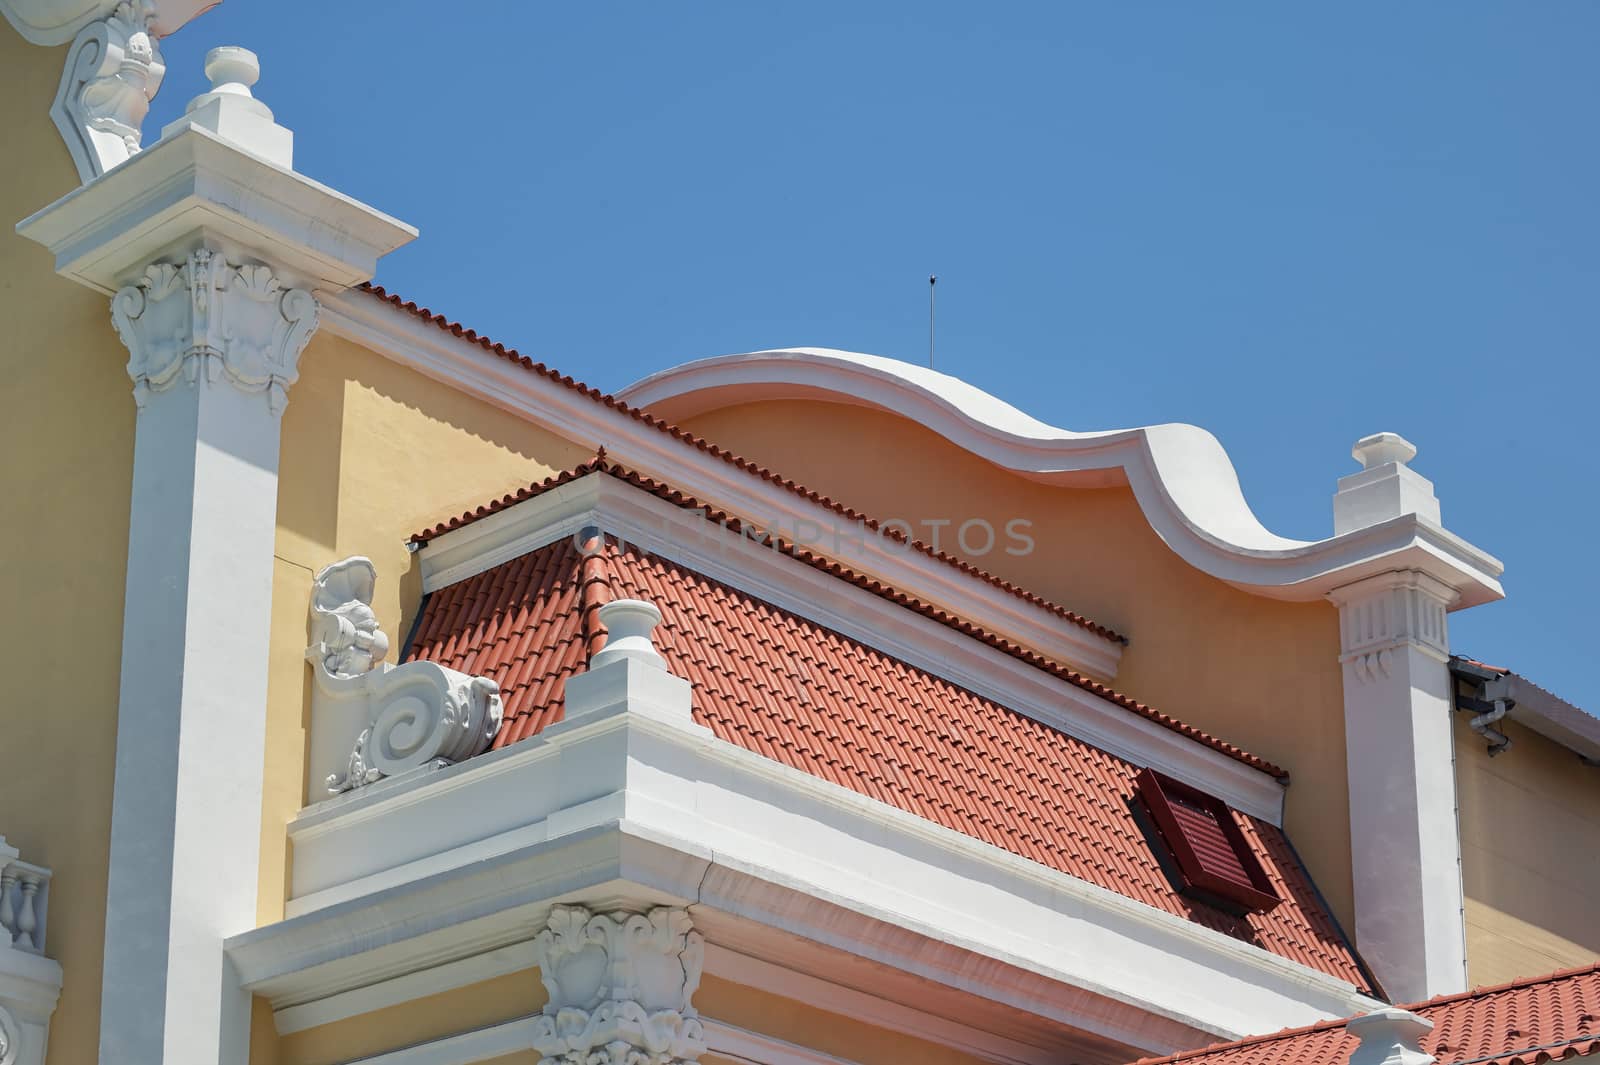 Roof tile pattern on classic house over blue sky